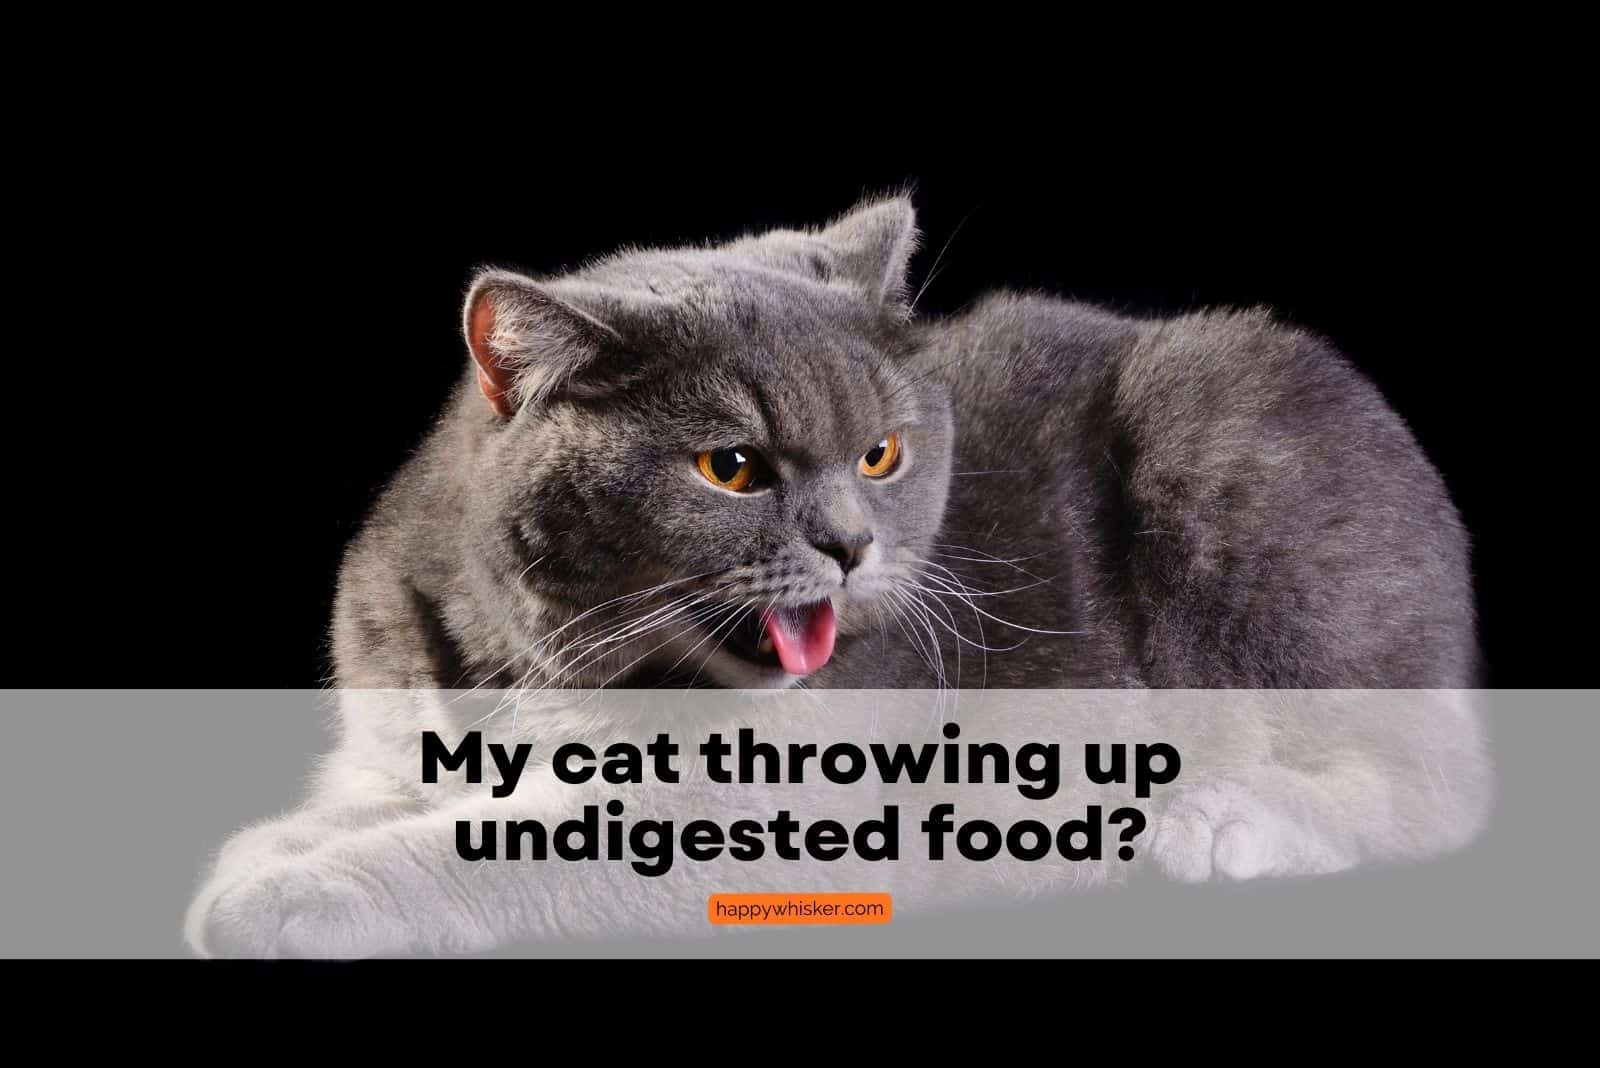 photo of a tabby cat throwing up undigested food